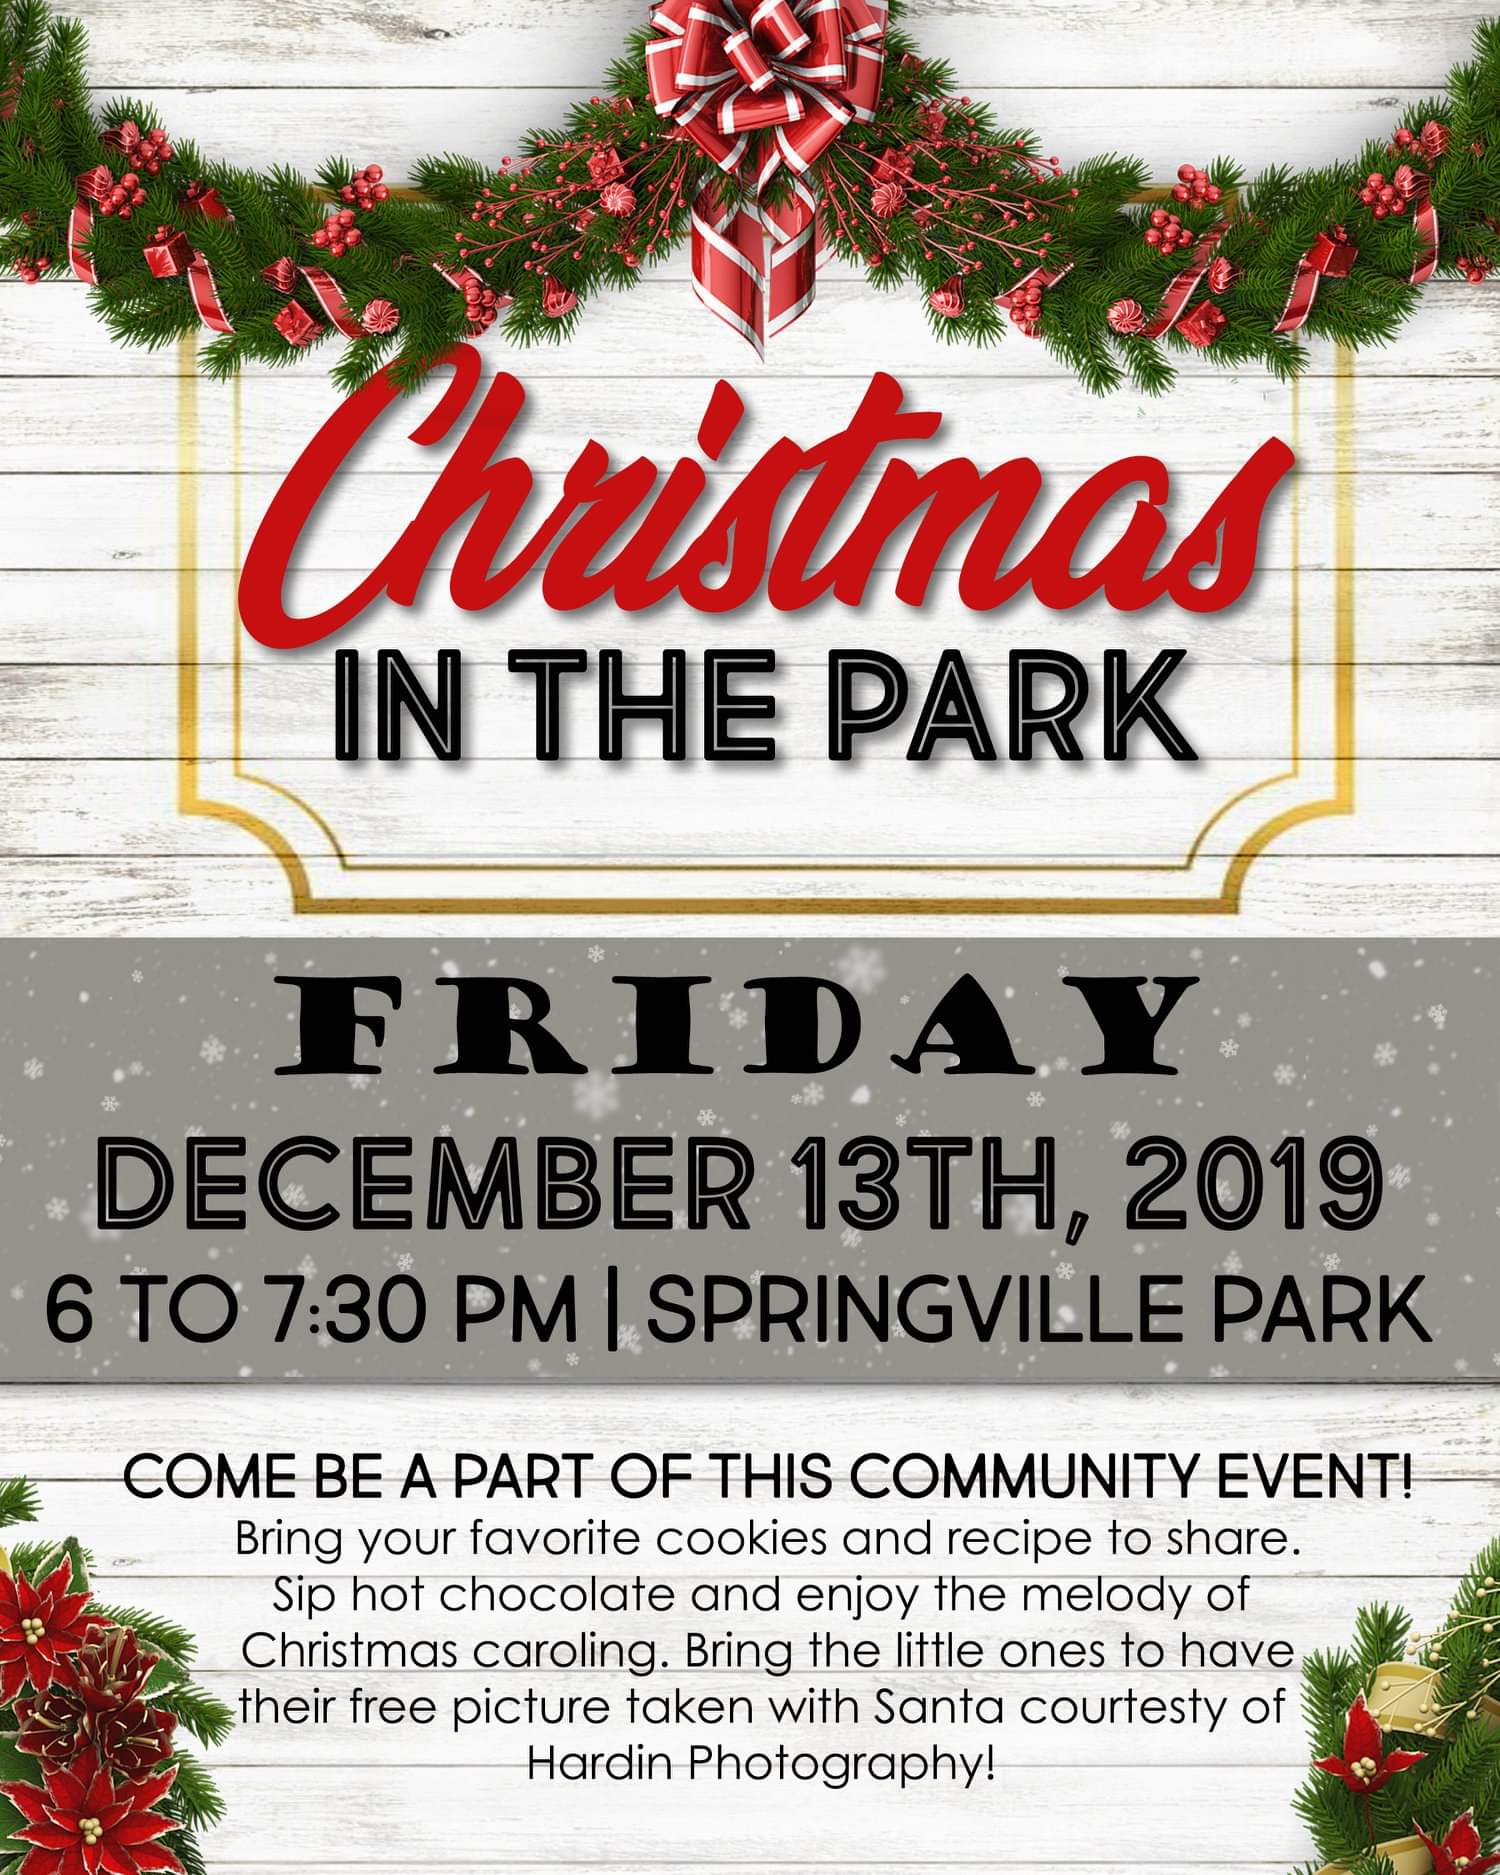 Christmas In The Park At Springville December 13th WBIW